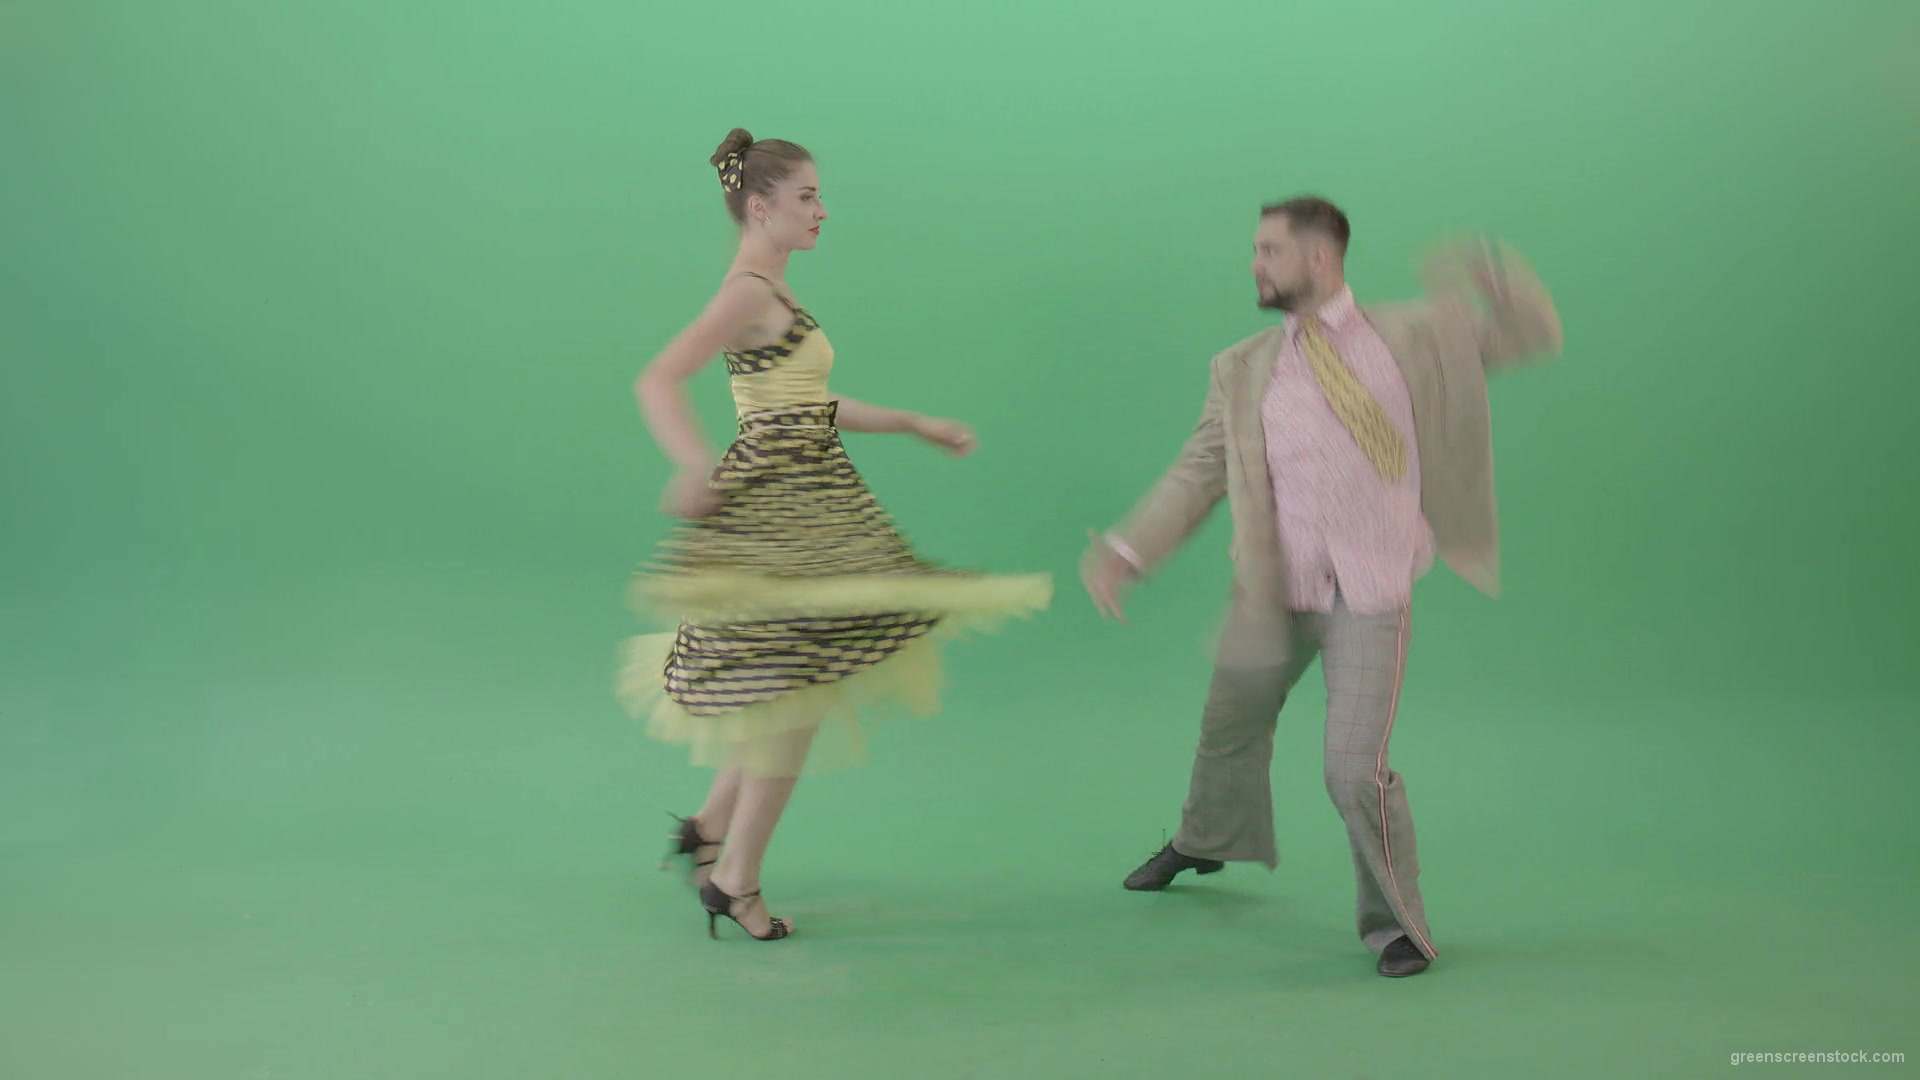 Boy-and-Girl-dancing-Boogie-woogie-and-rockandroll-isolated-on-Green-Screen-4K-Video-Footage-1920_009 Green Screen Stock